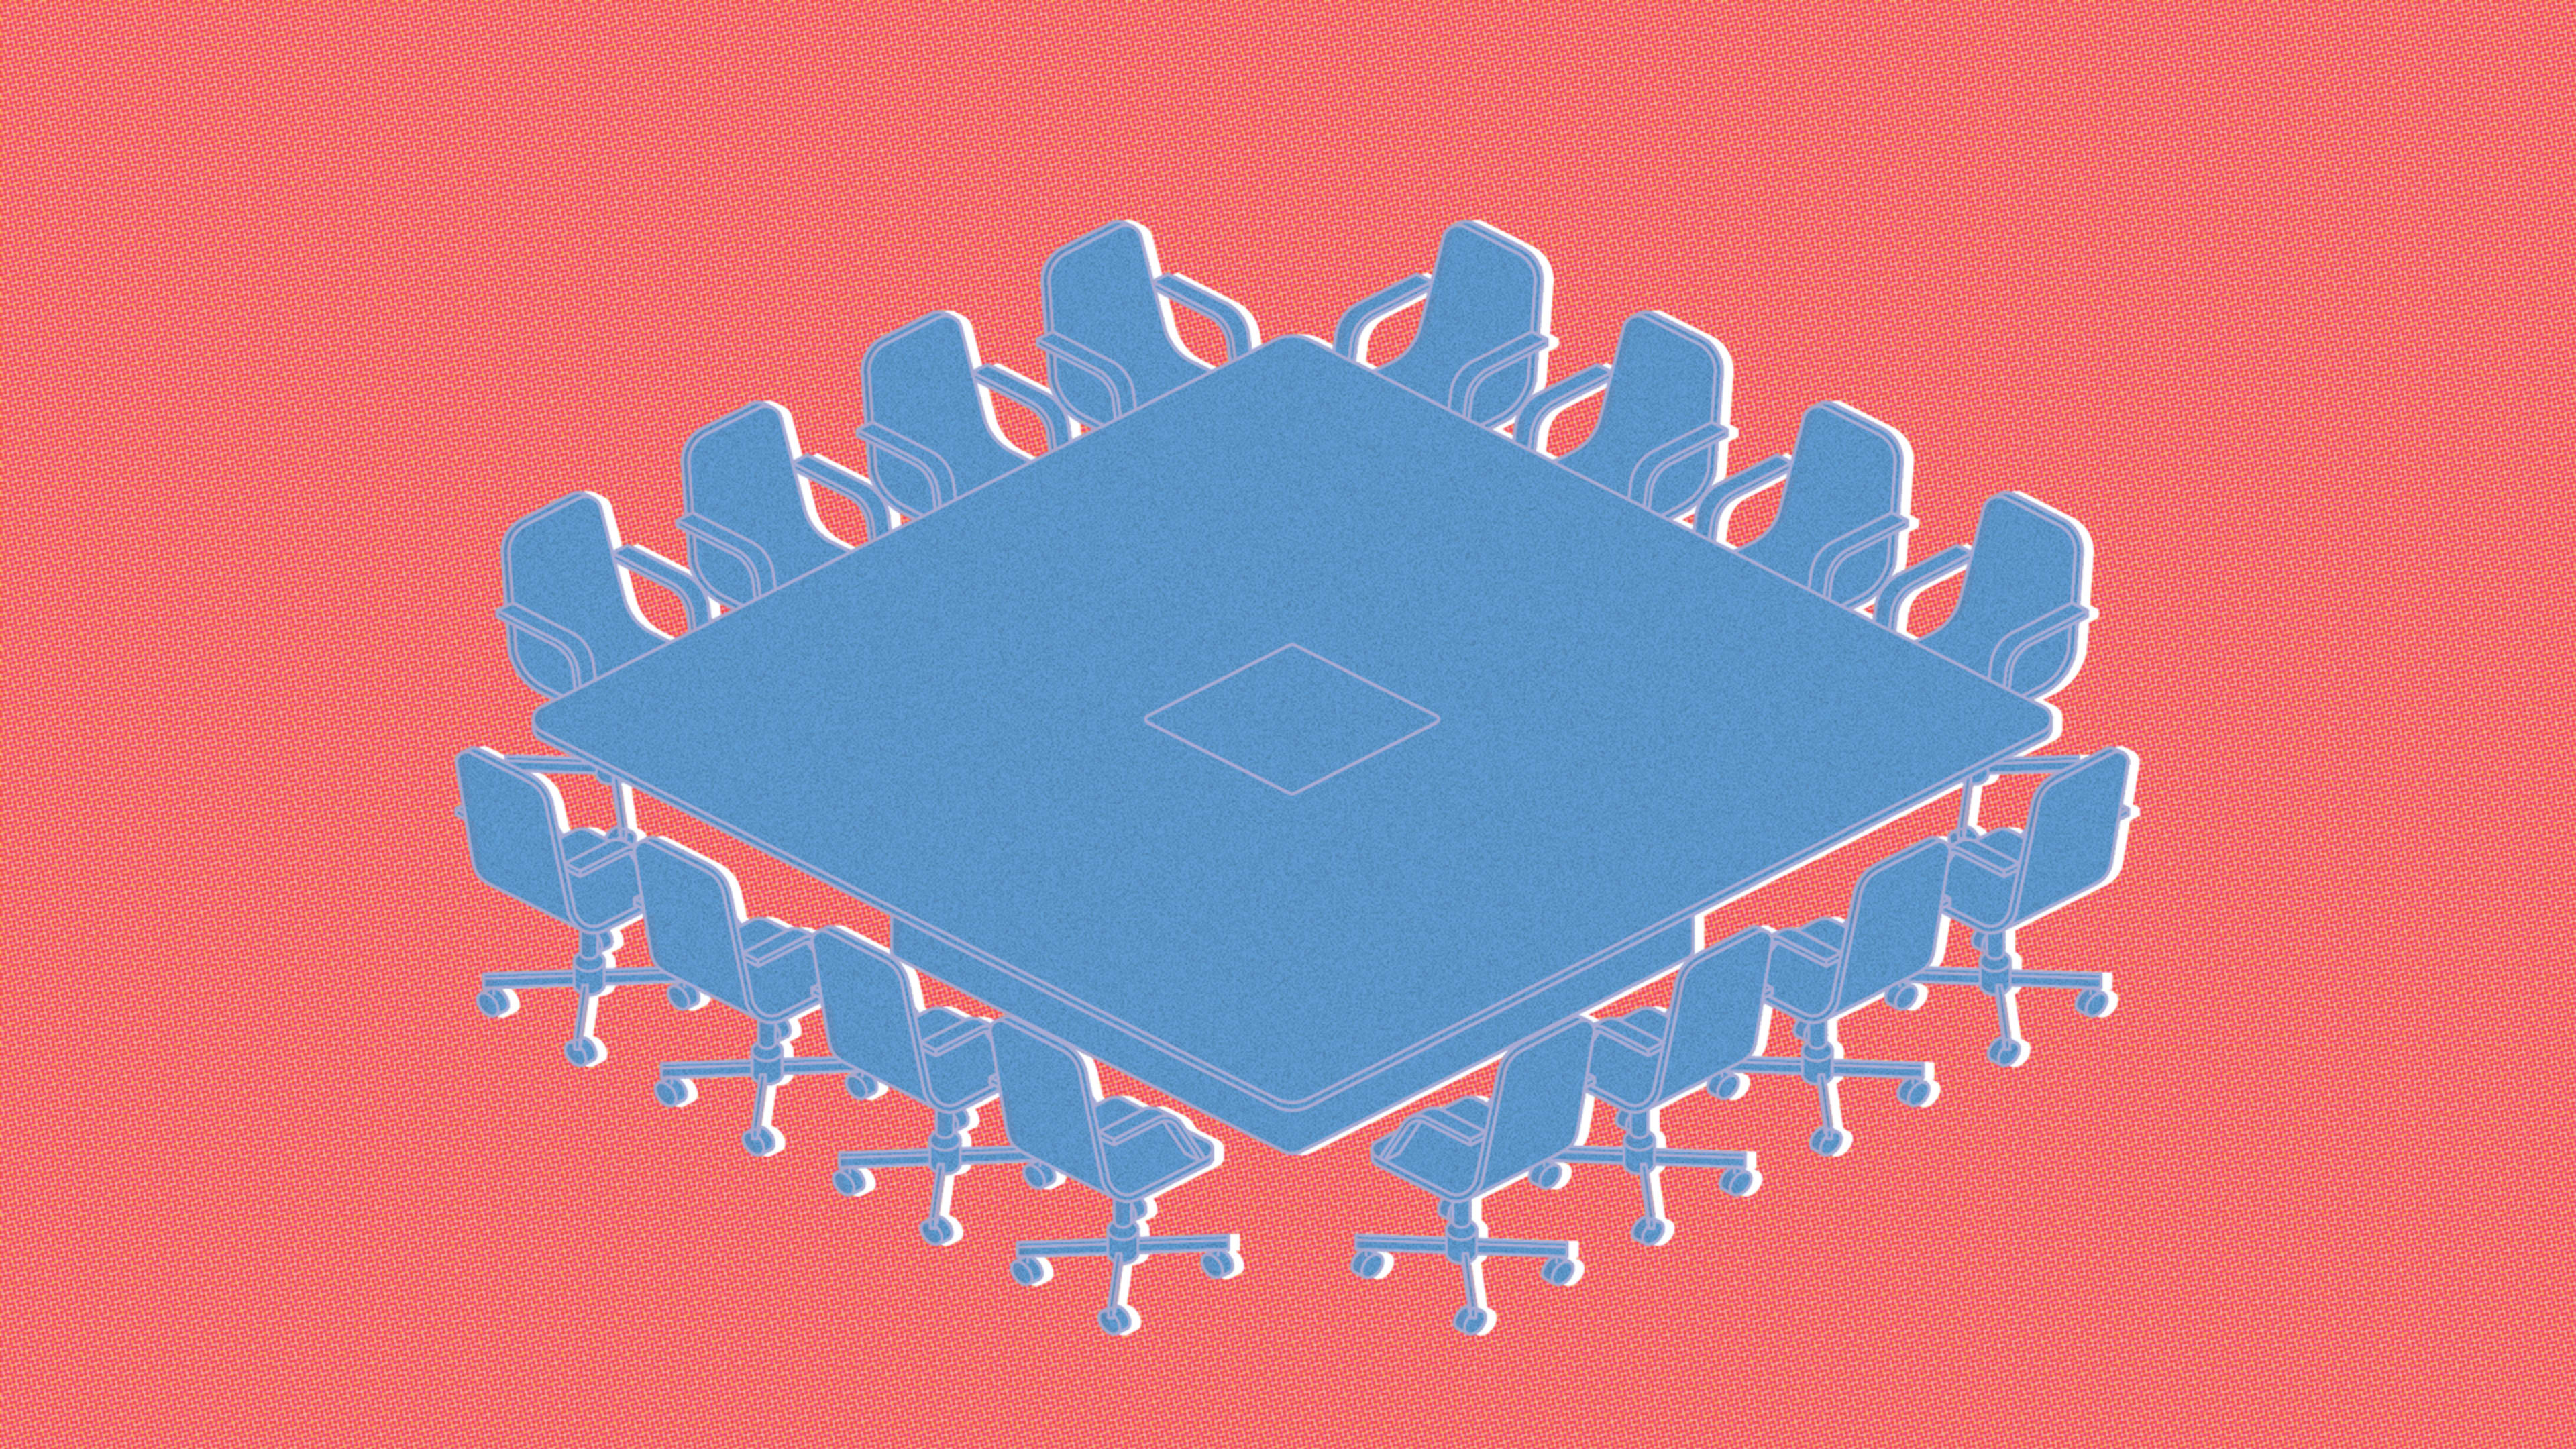 Why quotas alone won’t make boards (or companies) more diverse